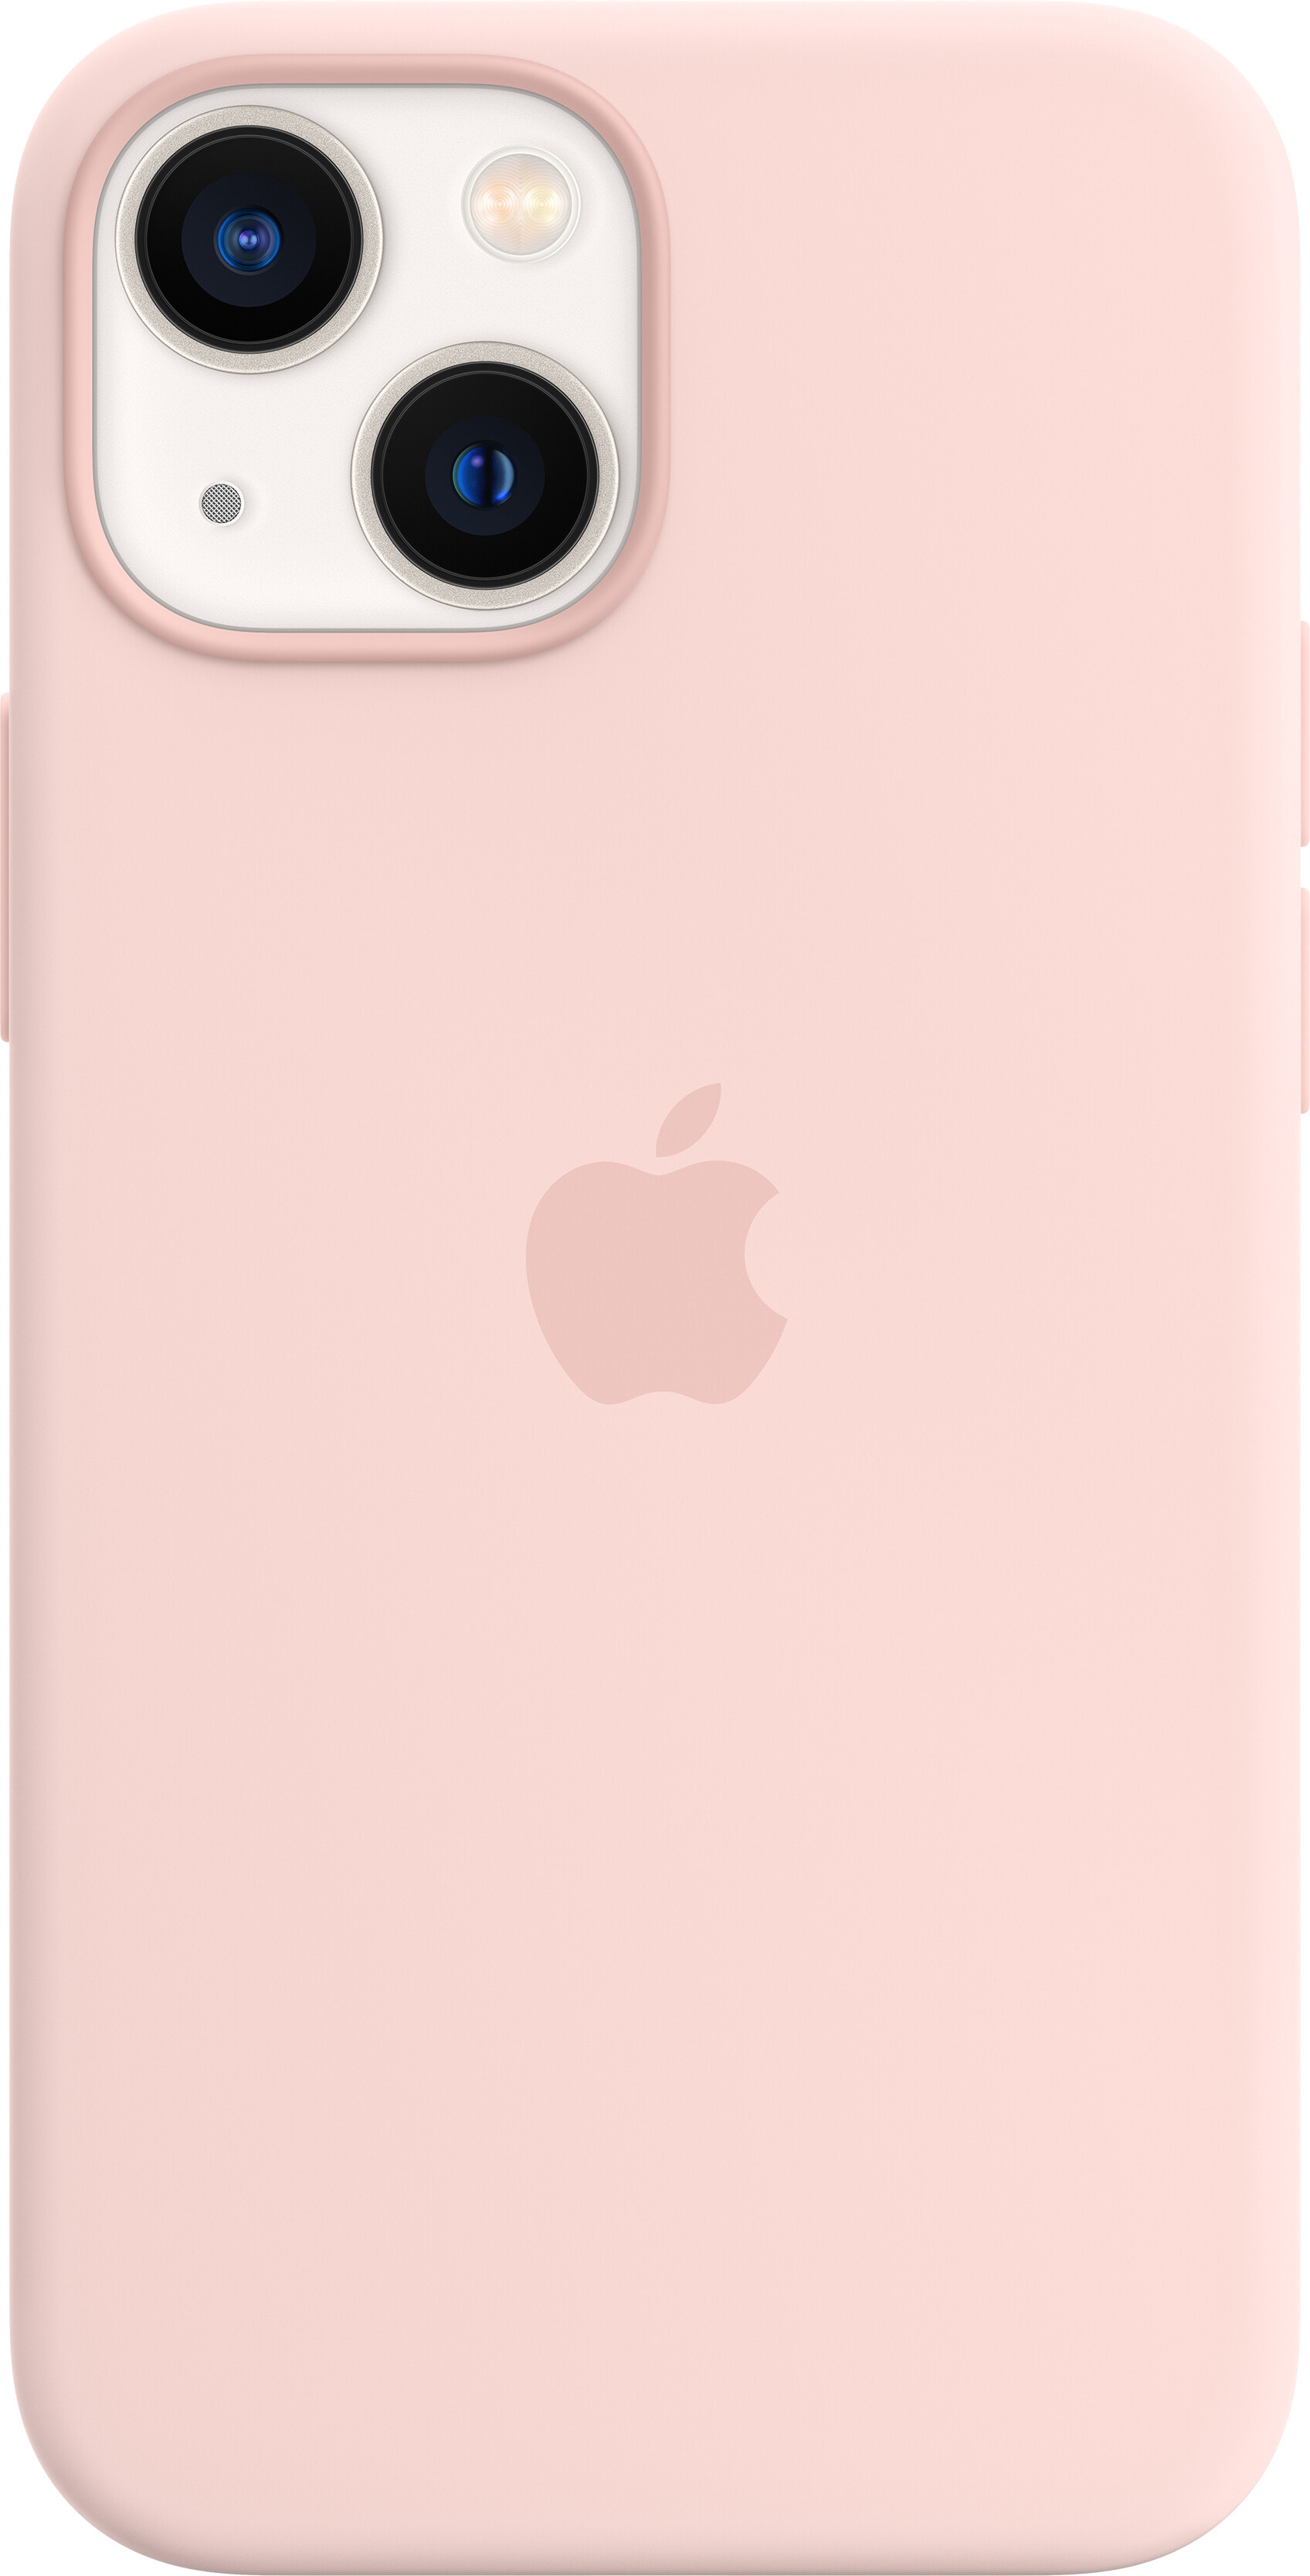 Apple iPhone 13 mini Silicone Case with MagSafe - Chalk Pink, Cover, Apple, iPhone 13 mini, 13.7 cm (5.4